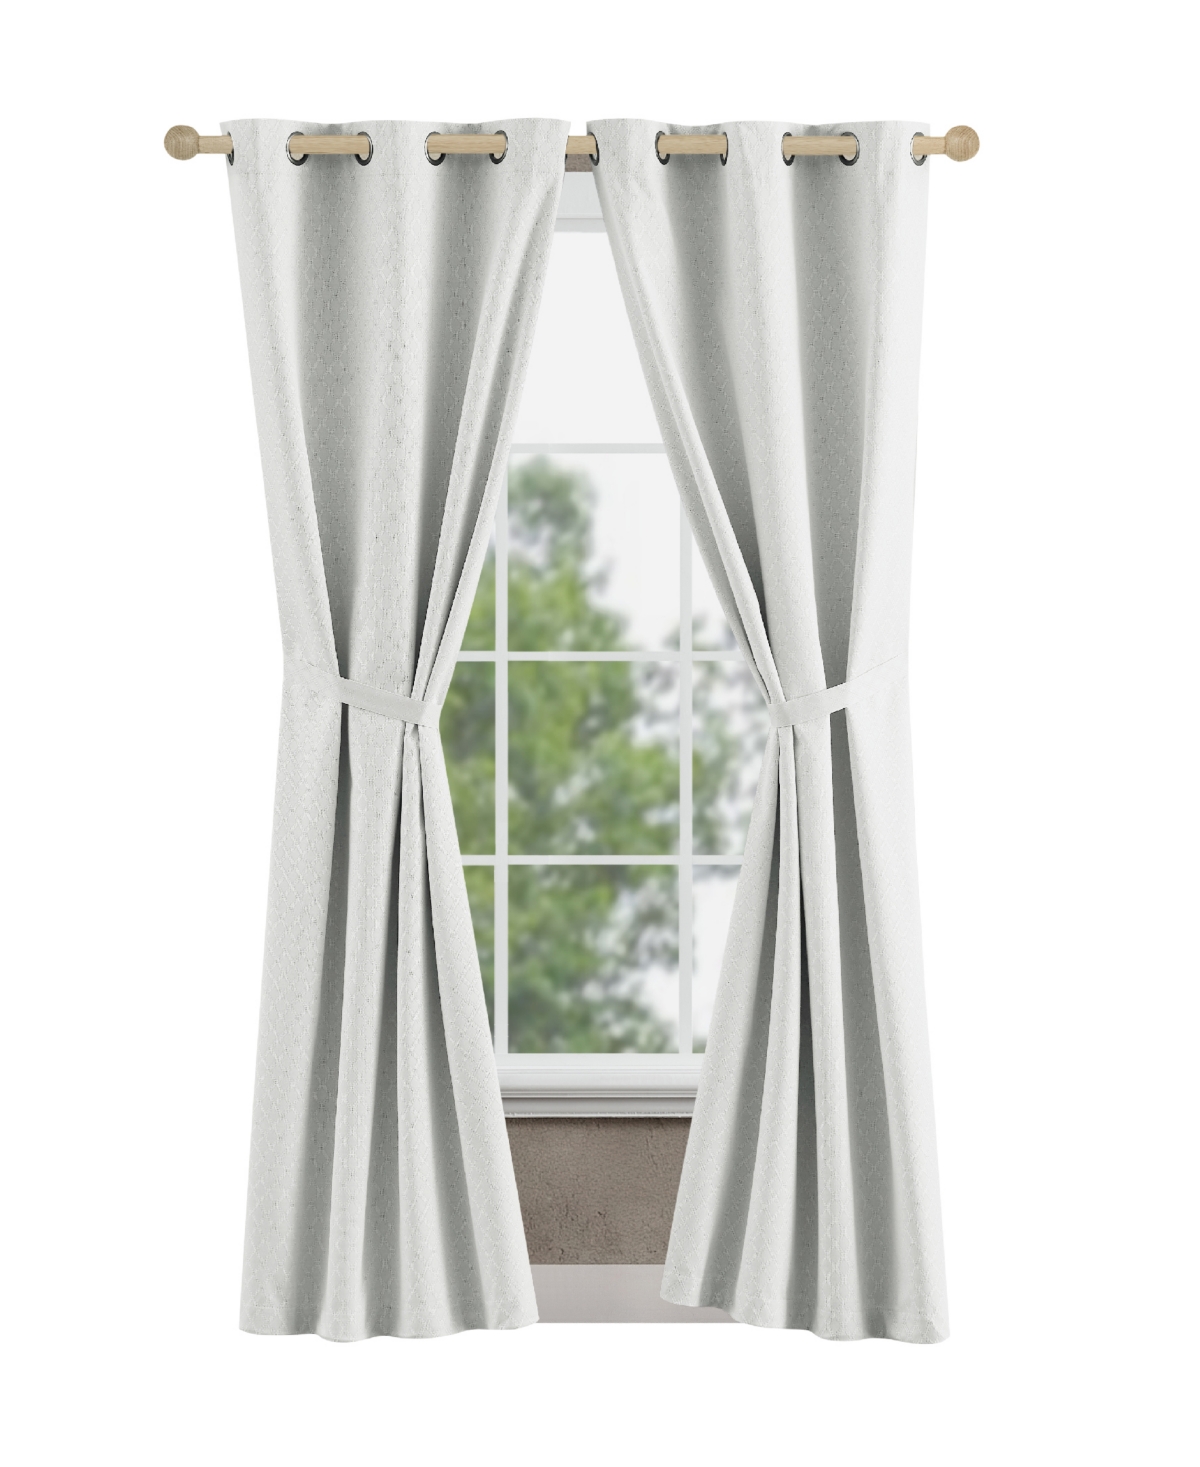 Jessica Simpson Faye Textured Blackout Grommet Window Curtain Panel Pair With Tiebacks, 38" X 84" In White